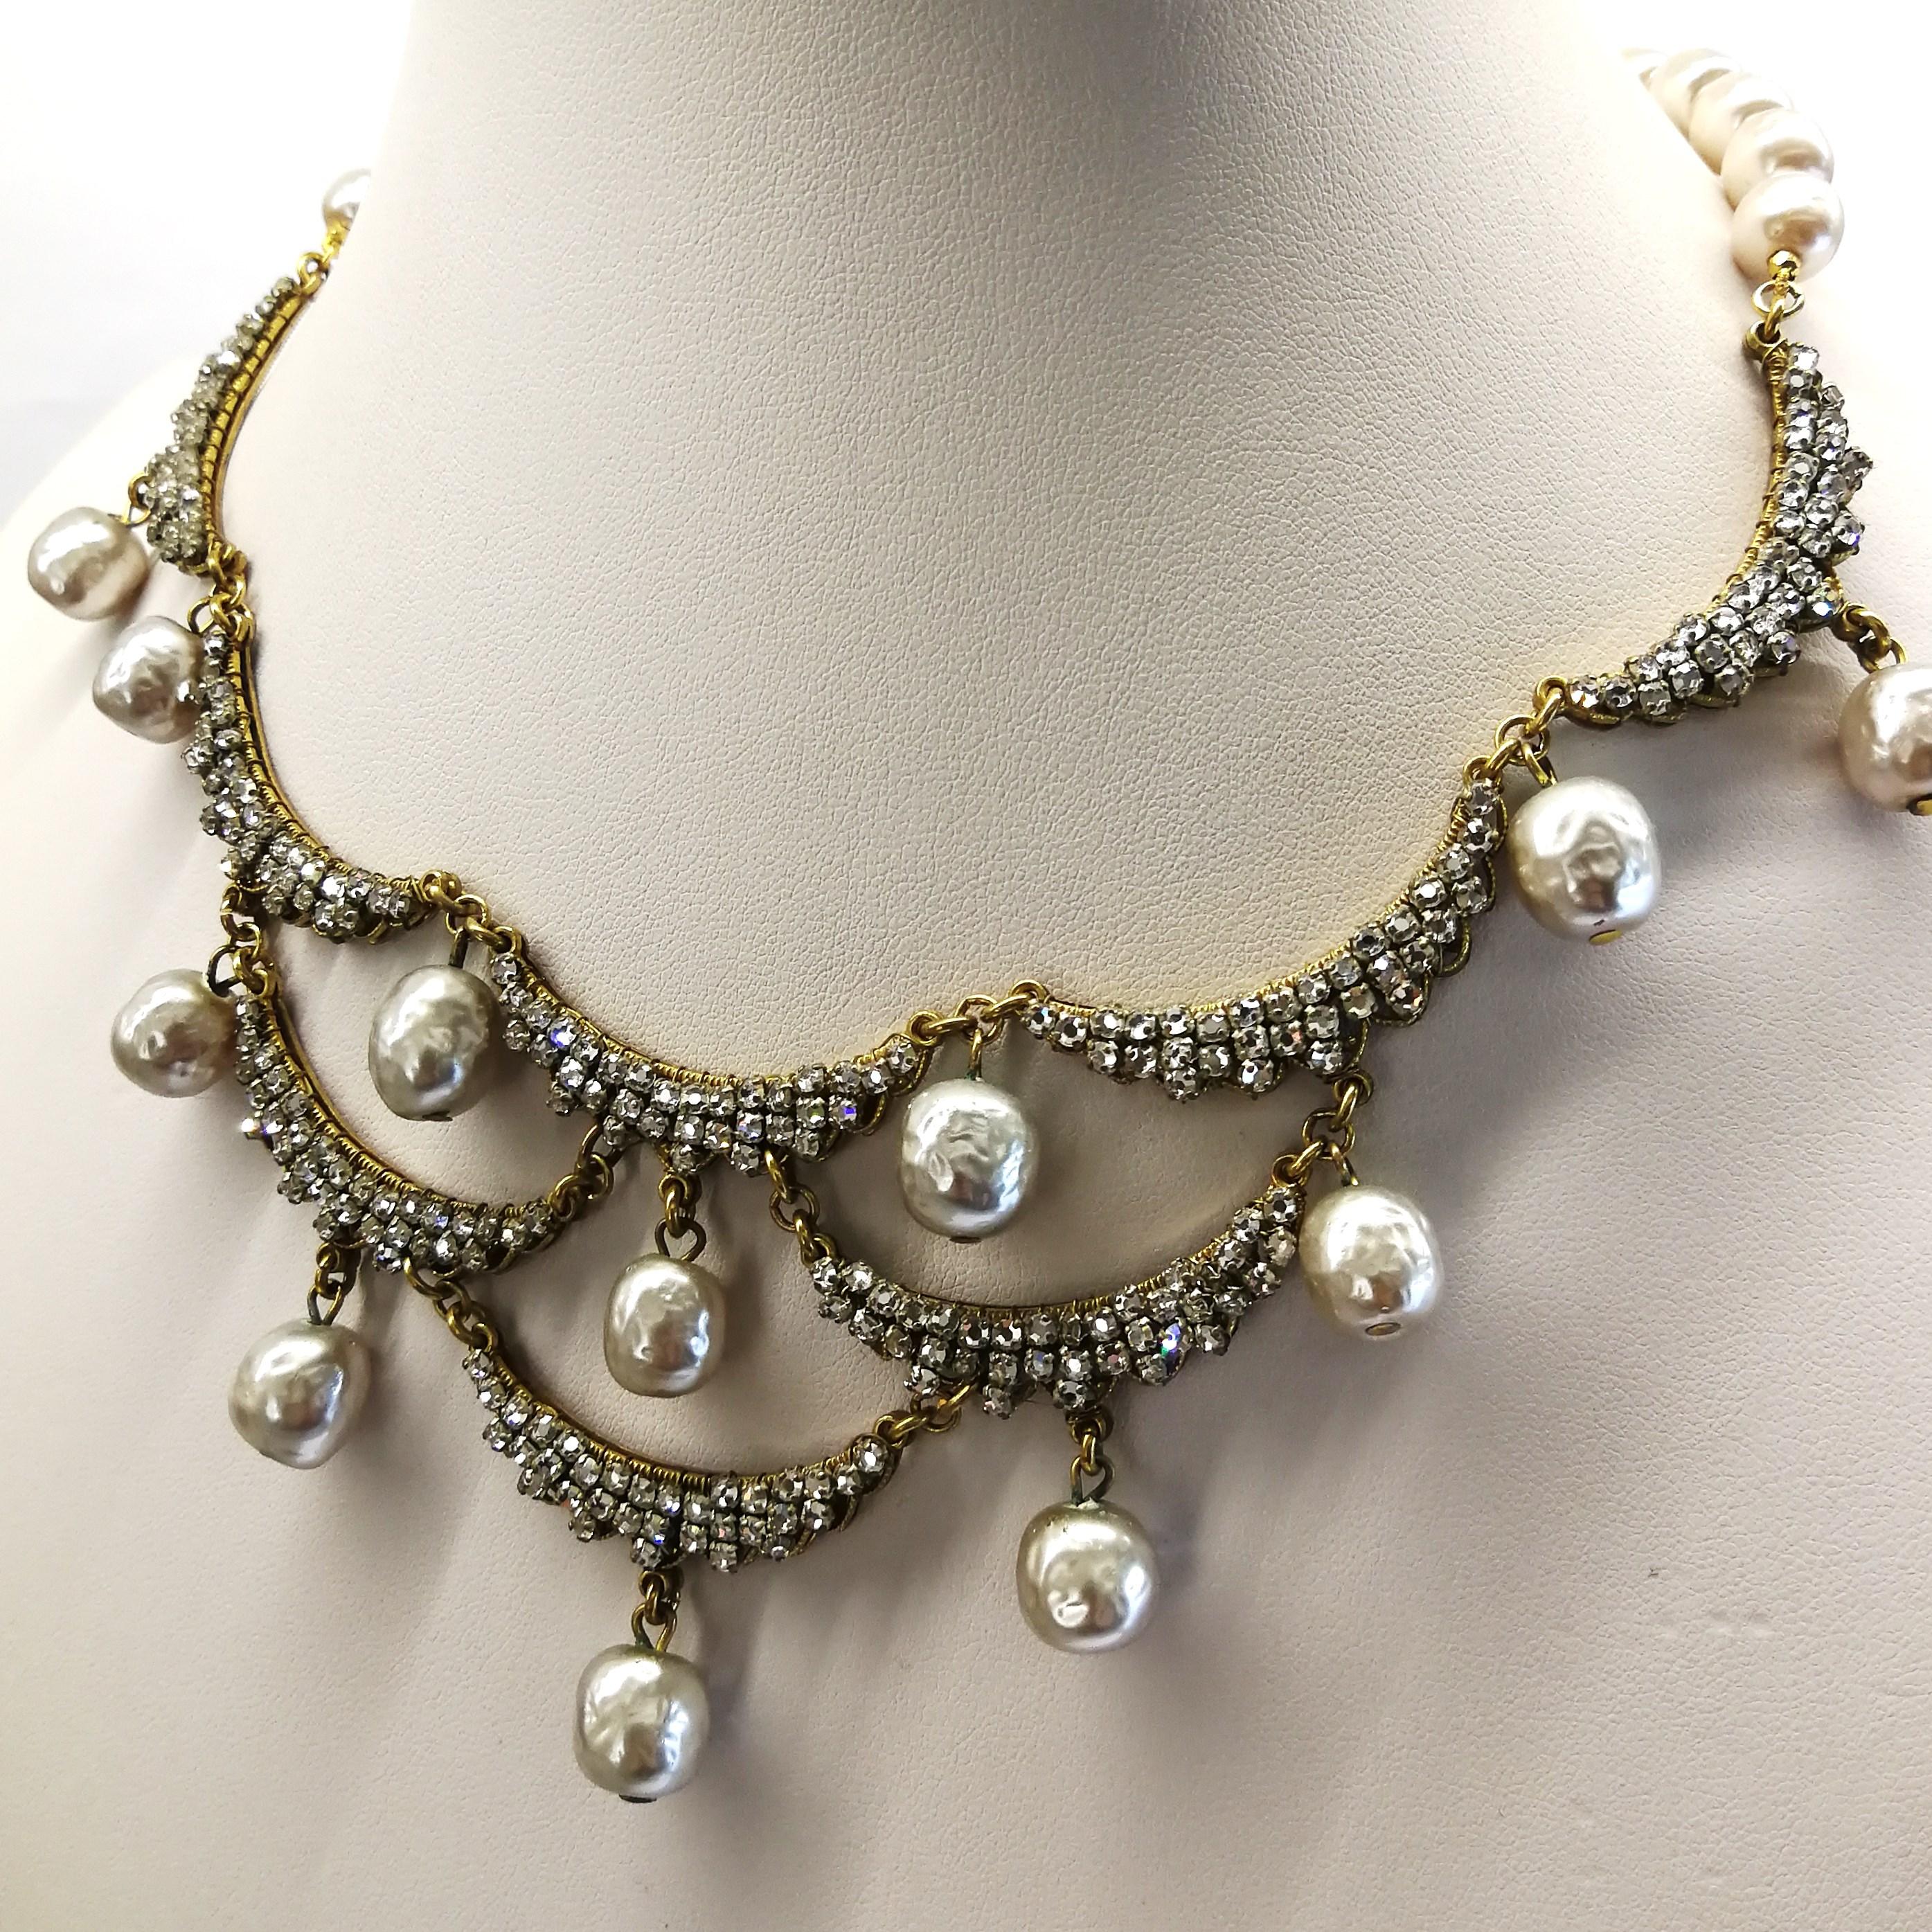 Women's A necklace and earrings of gilded metal, paste and baroque pearl, Miriam Haskell